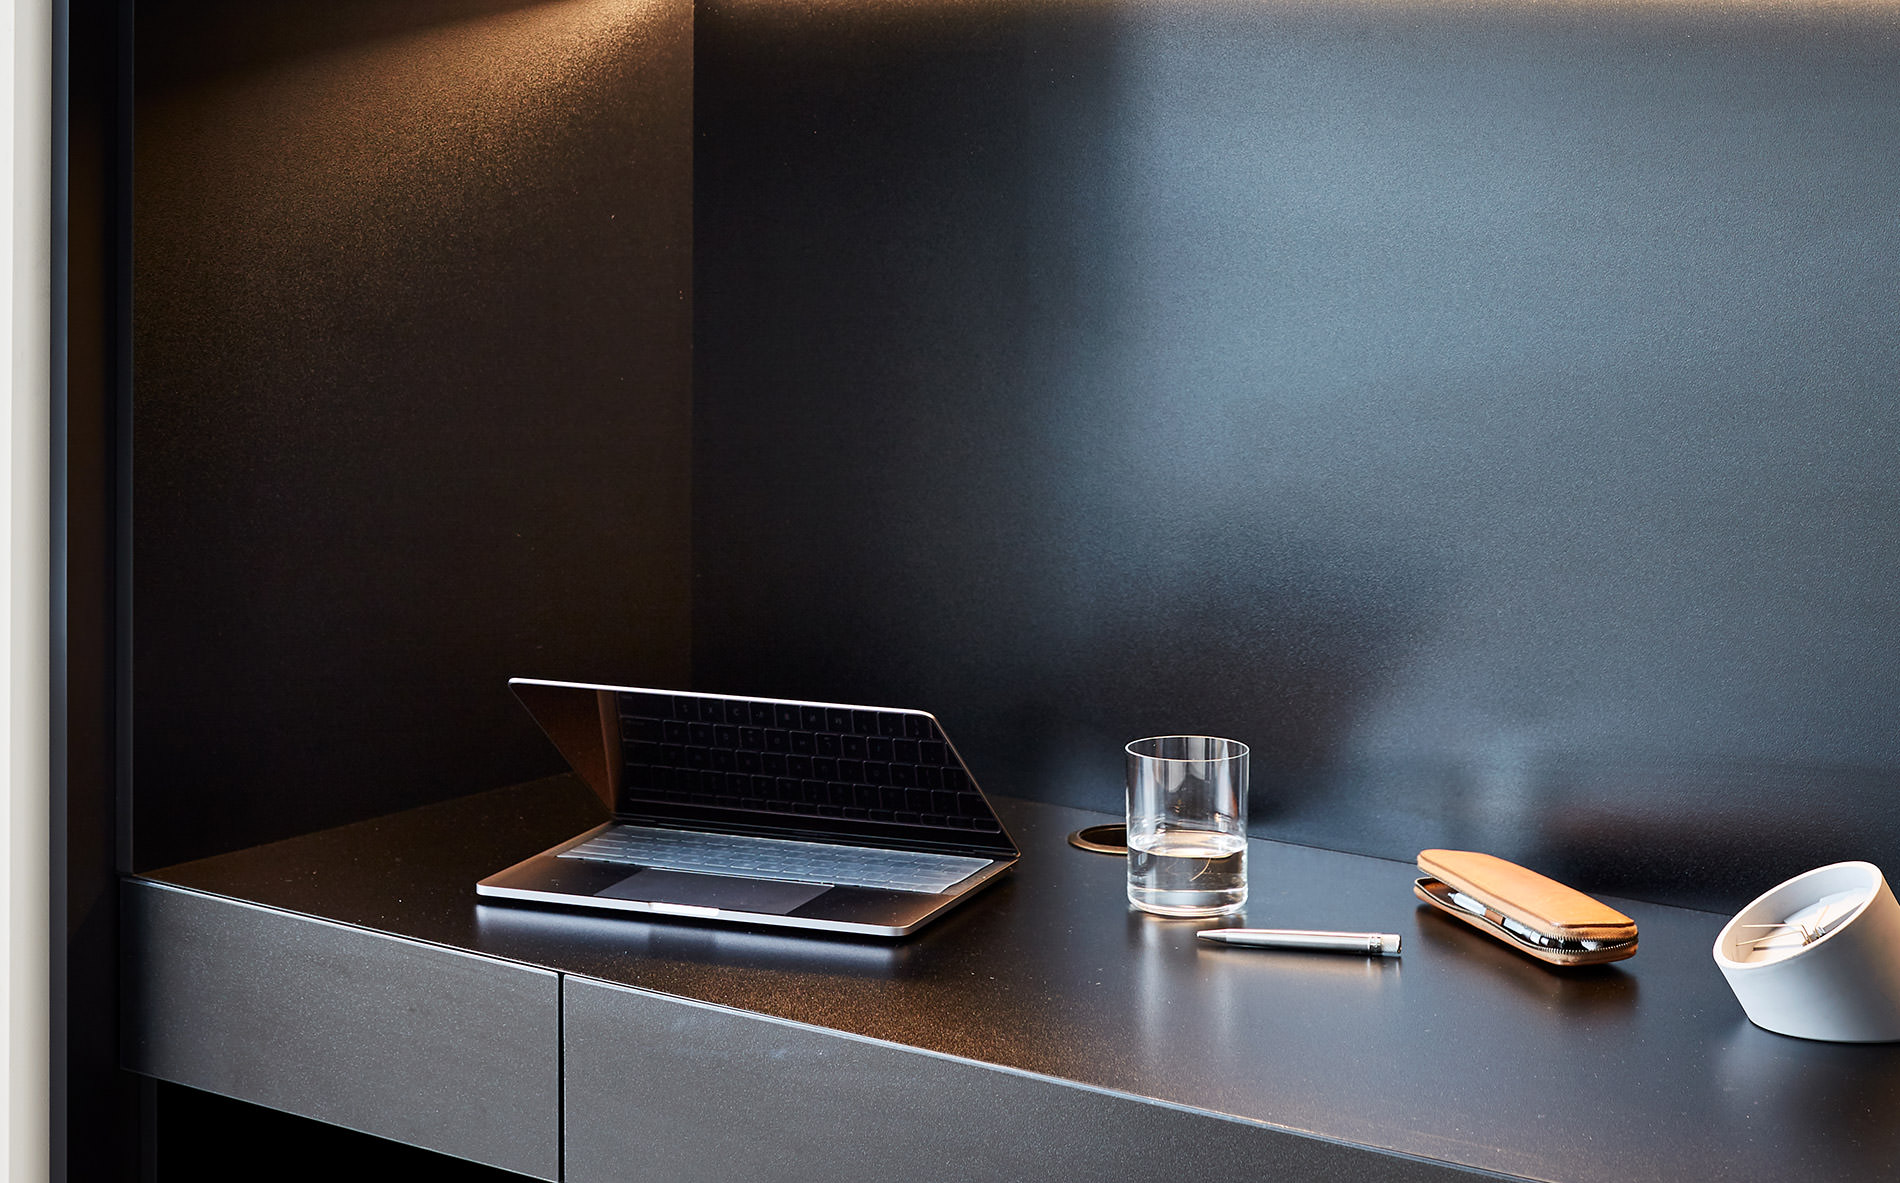 purposefully perched on a stunning back lit desk designed by Australian furniture designer FrancoCrea is a laptop read for working from home